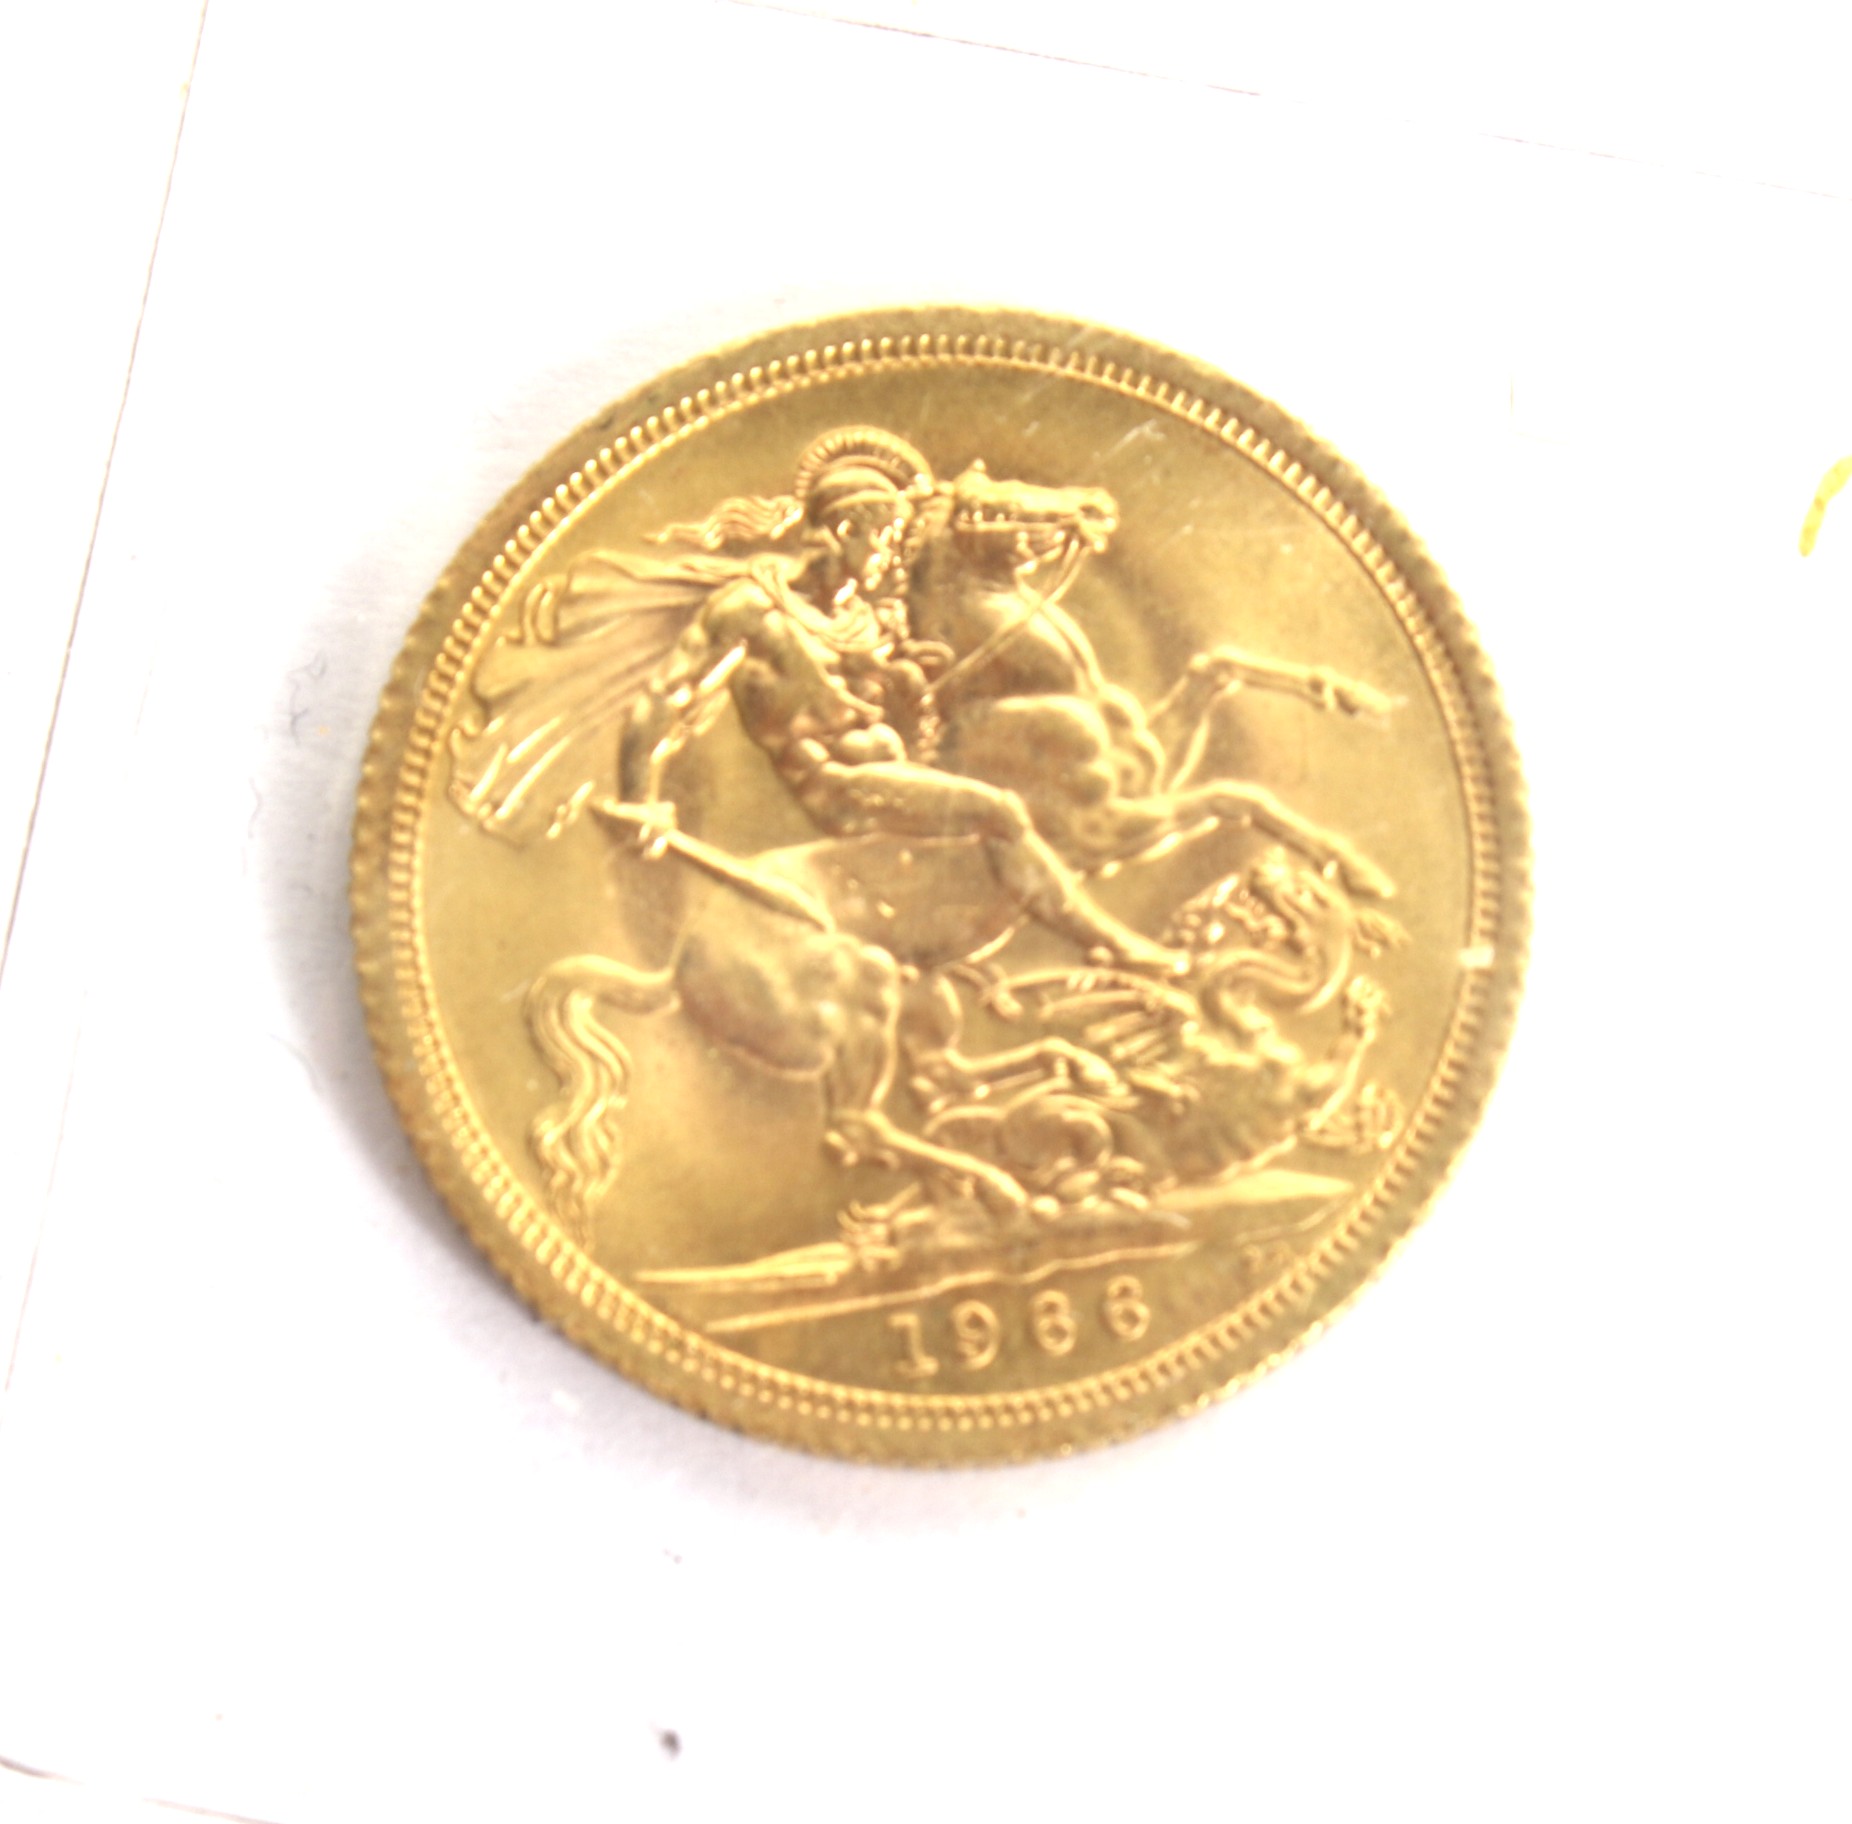 A 1966 sovereign coin. - Image 2 of 2